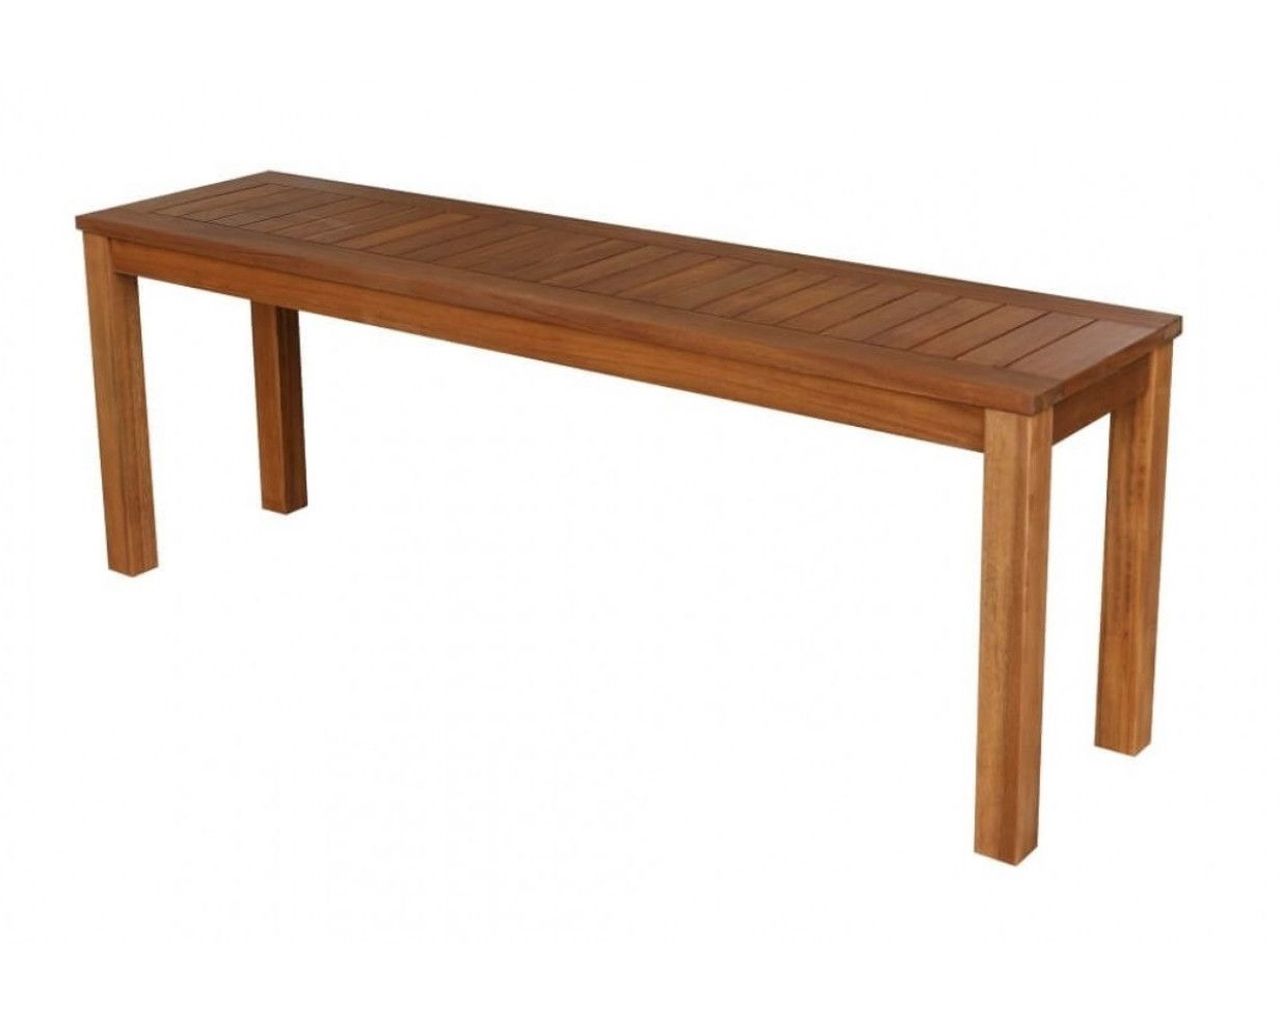 Elwood 3 Piece Bench Setting, , hi-res image number null